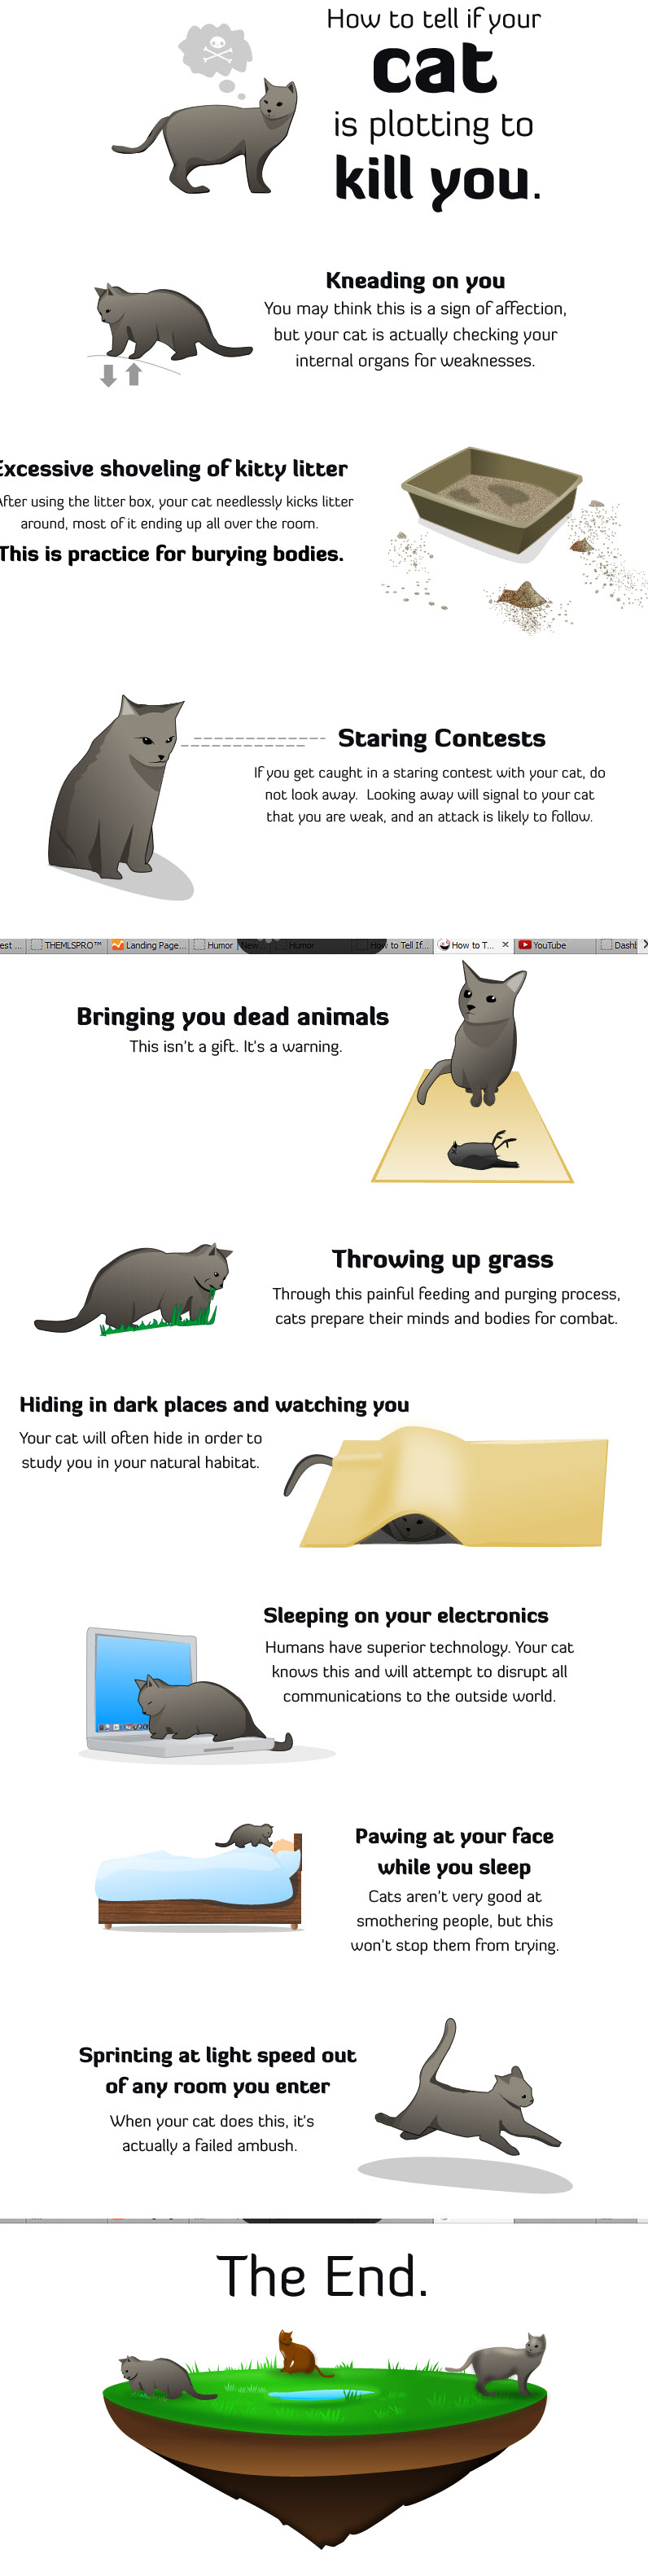 How to tell if your cat is plotting to kill you, comic